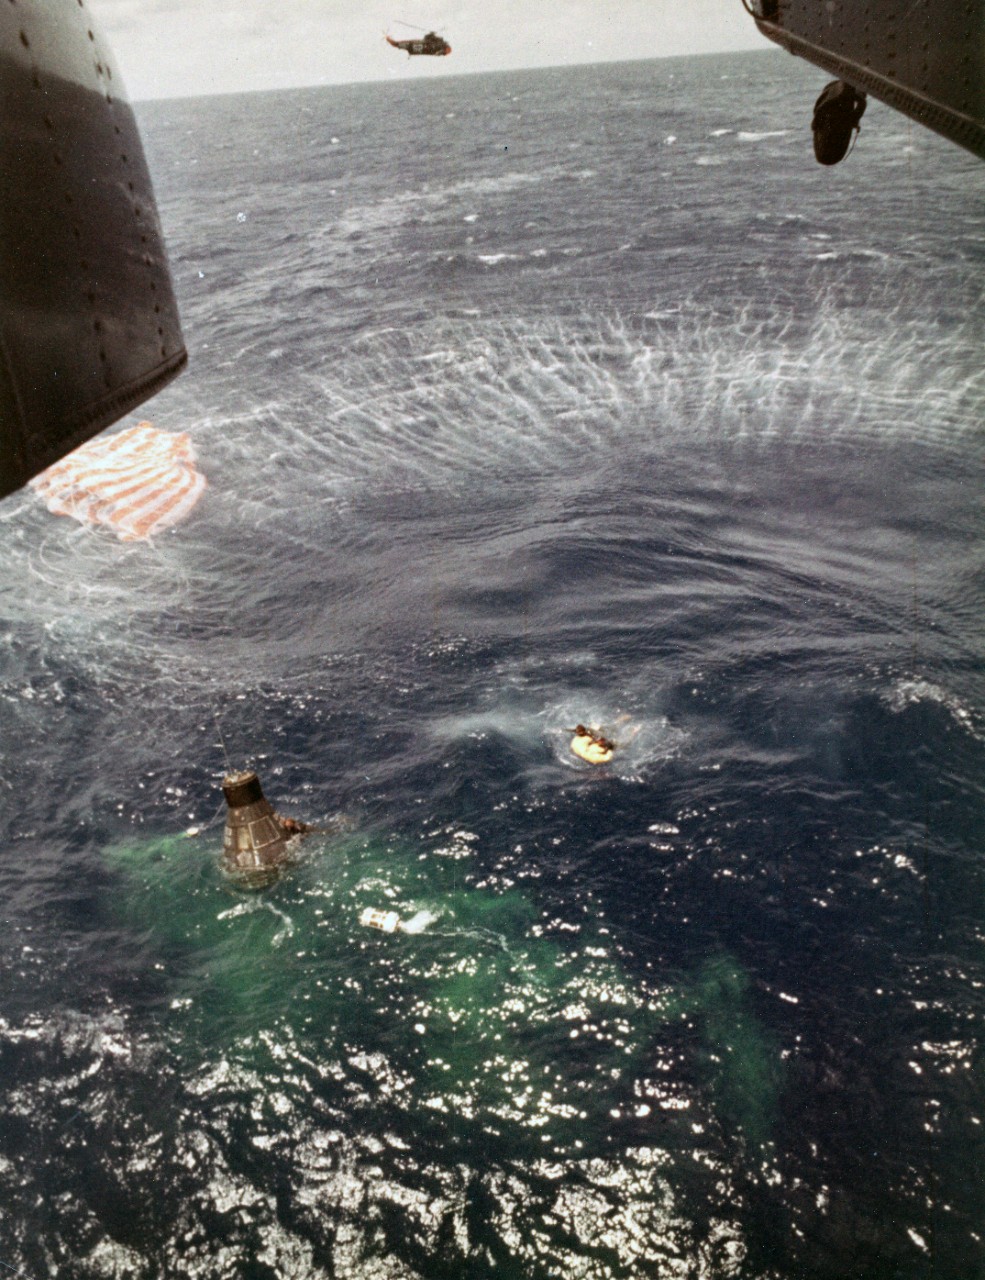 A swimmer contacts Cooper as the astronaut waits within Faith 7 and two helicopters hover over the splashdown area, 16 May 1963. Two other men of the team on the right bring up the flotation gear to attach it to the space capsule. Faith 7’s main ...